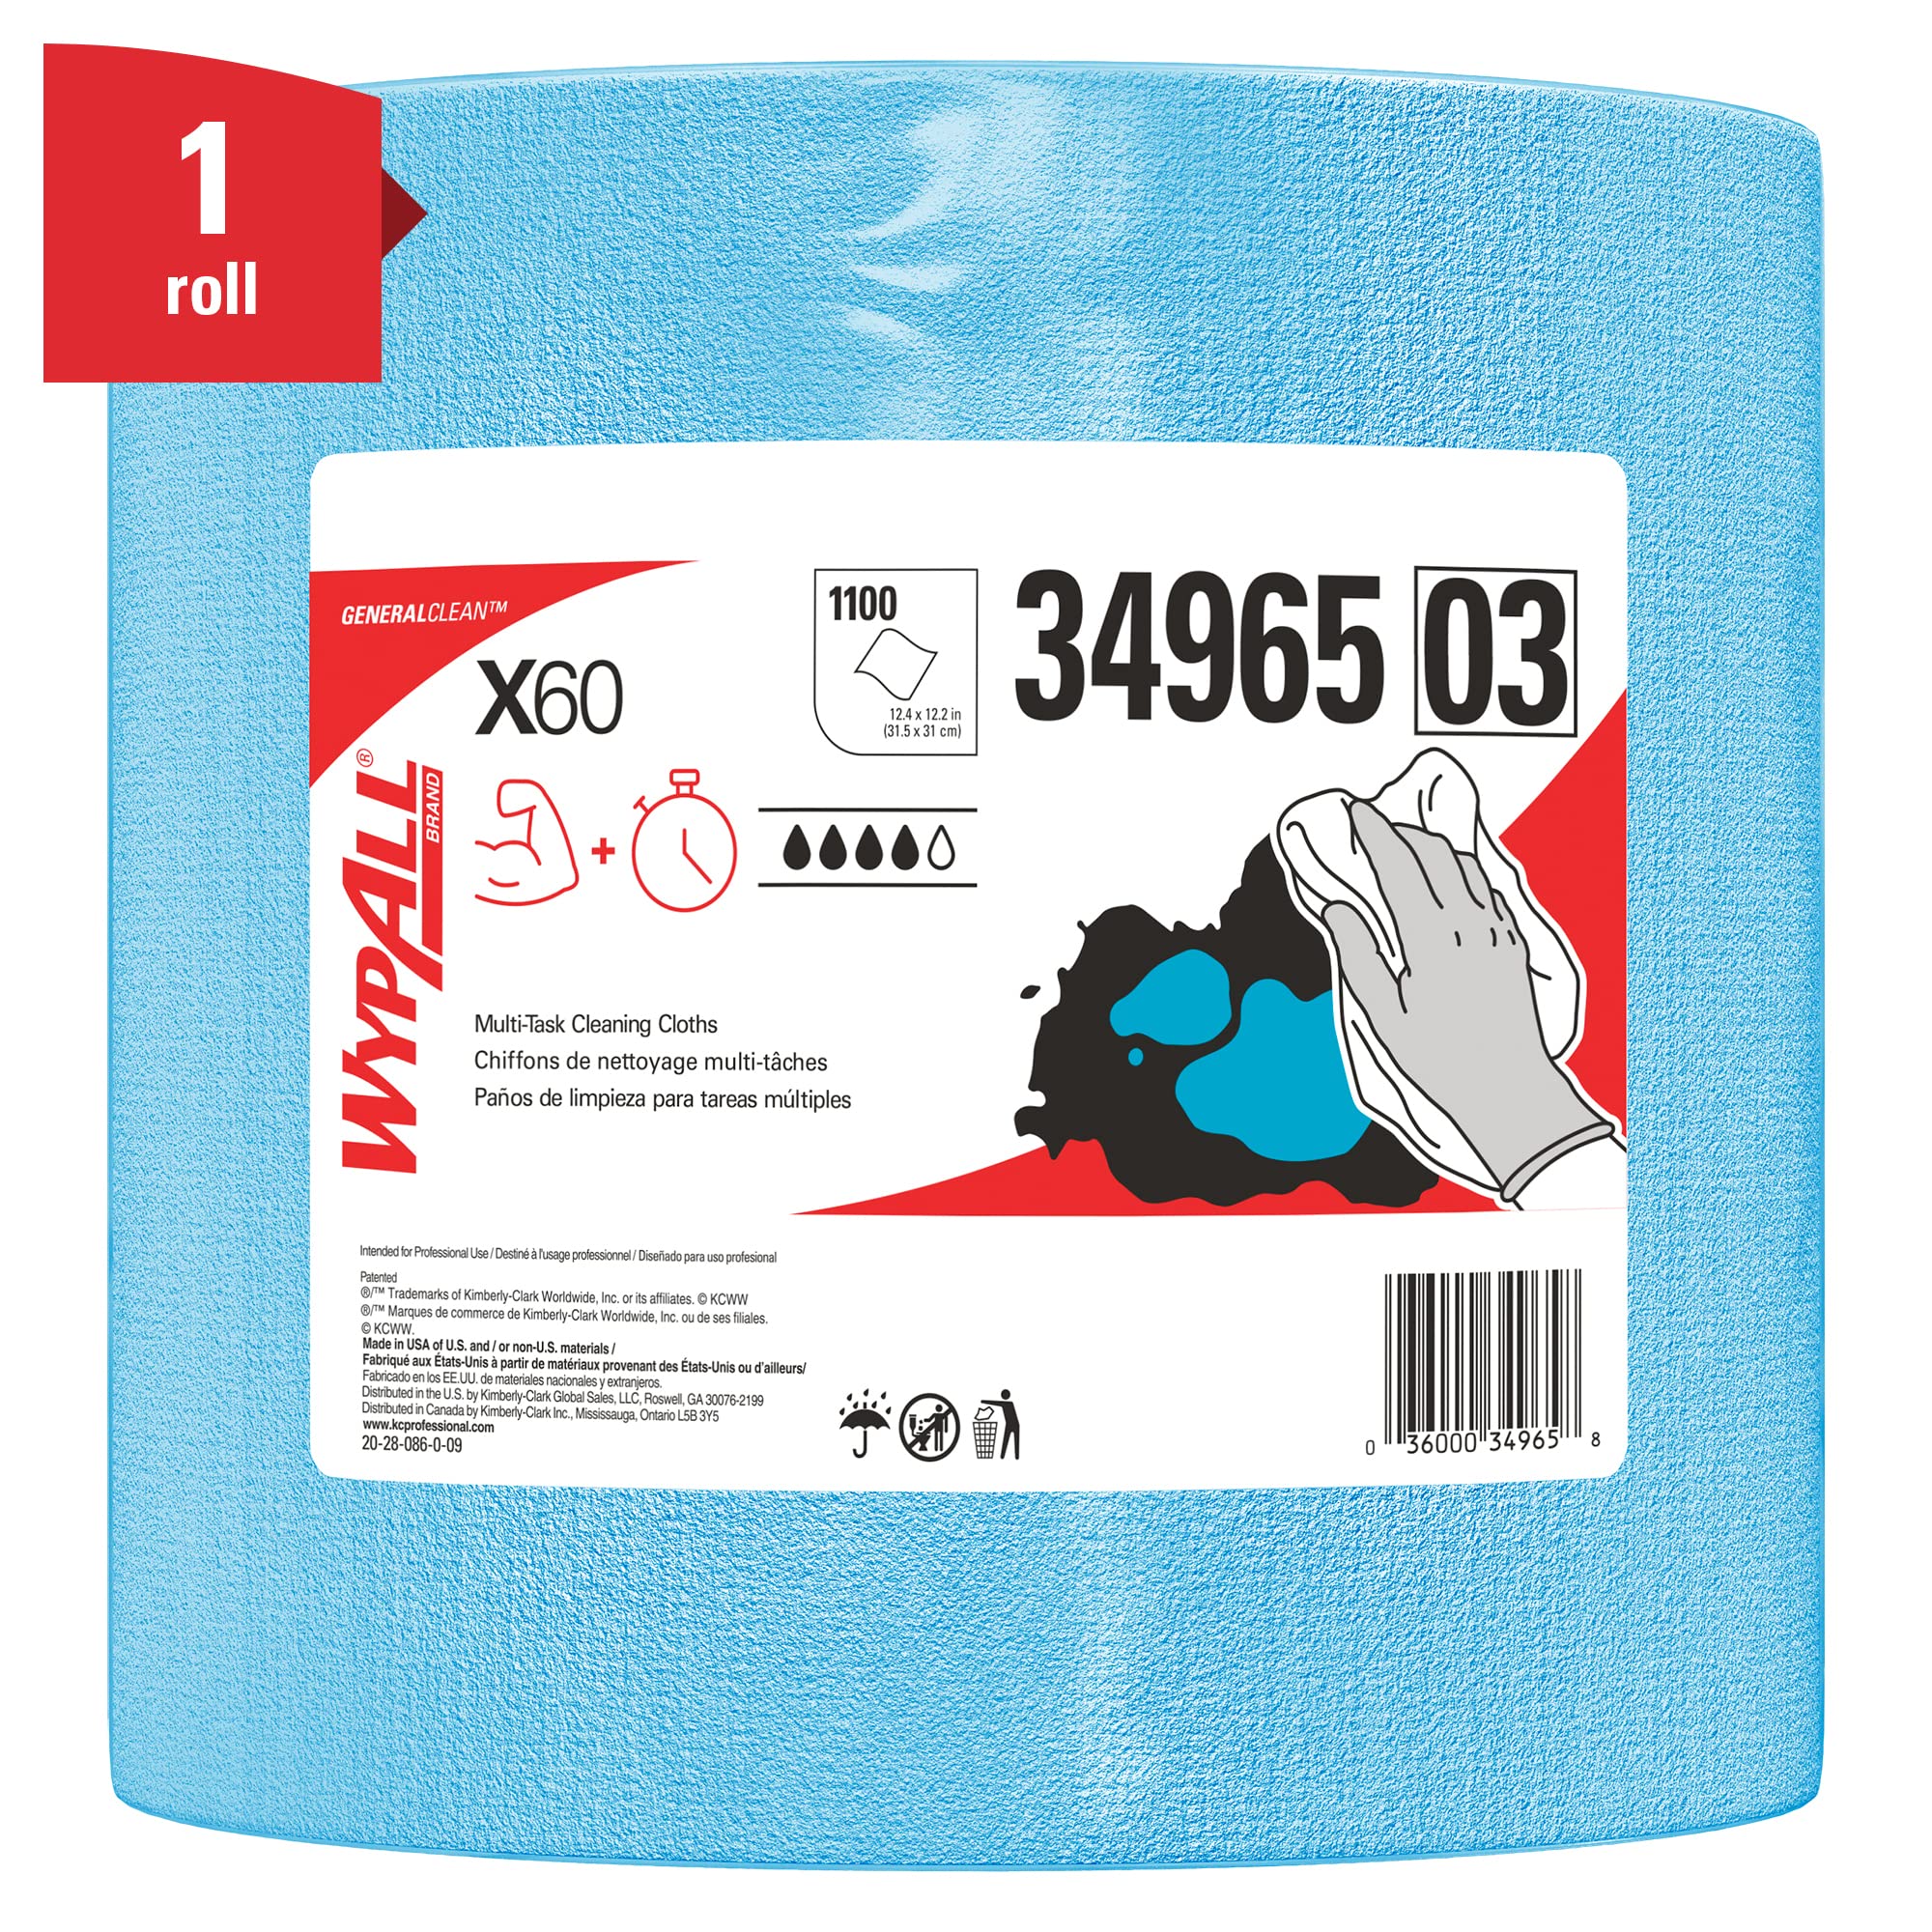 WypAll General Clean X60 Multi-Task Cleaning Cloths (34965), Jumbo Roll, Blue, 1,100 Sheets / Roll, 1 Roll / Case